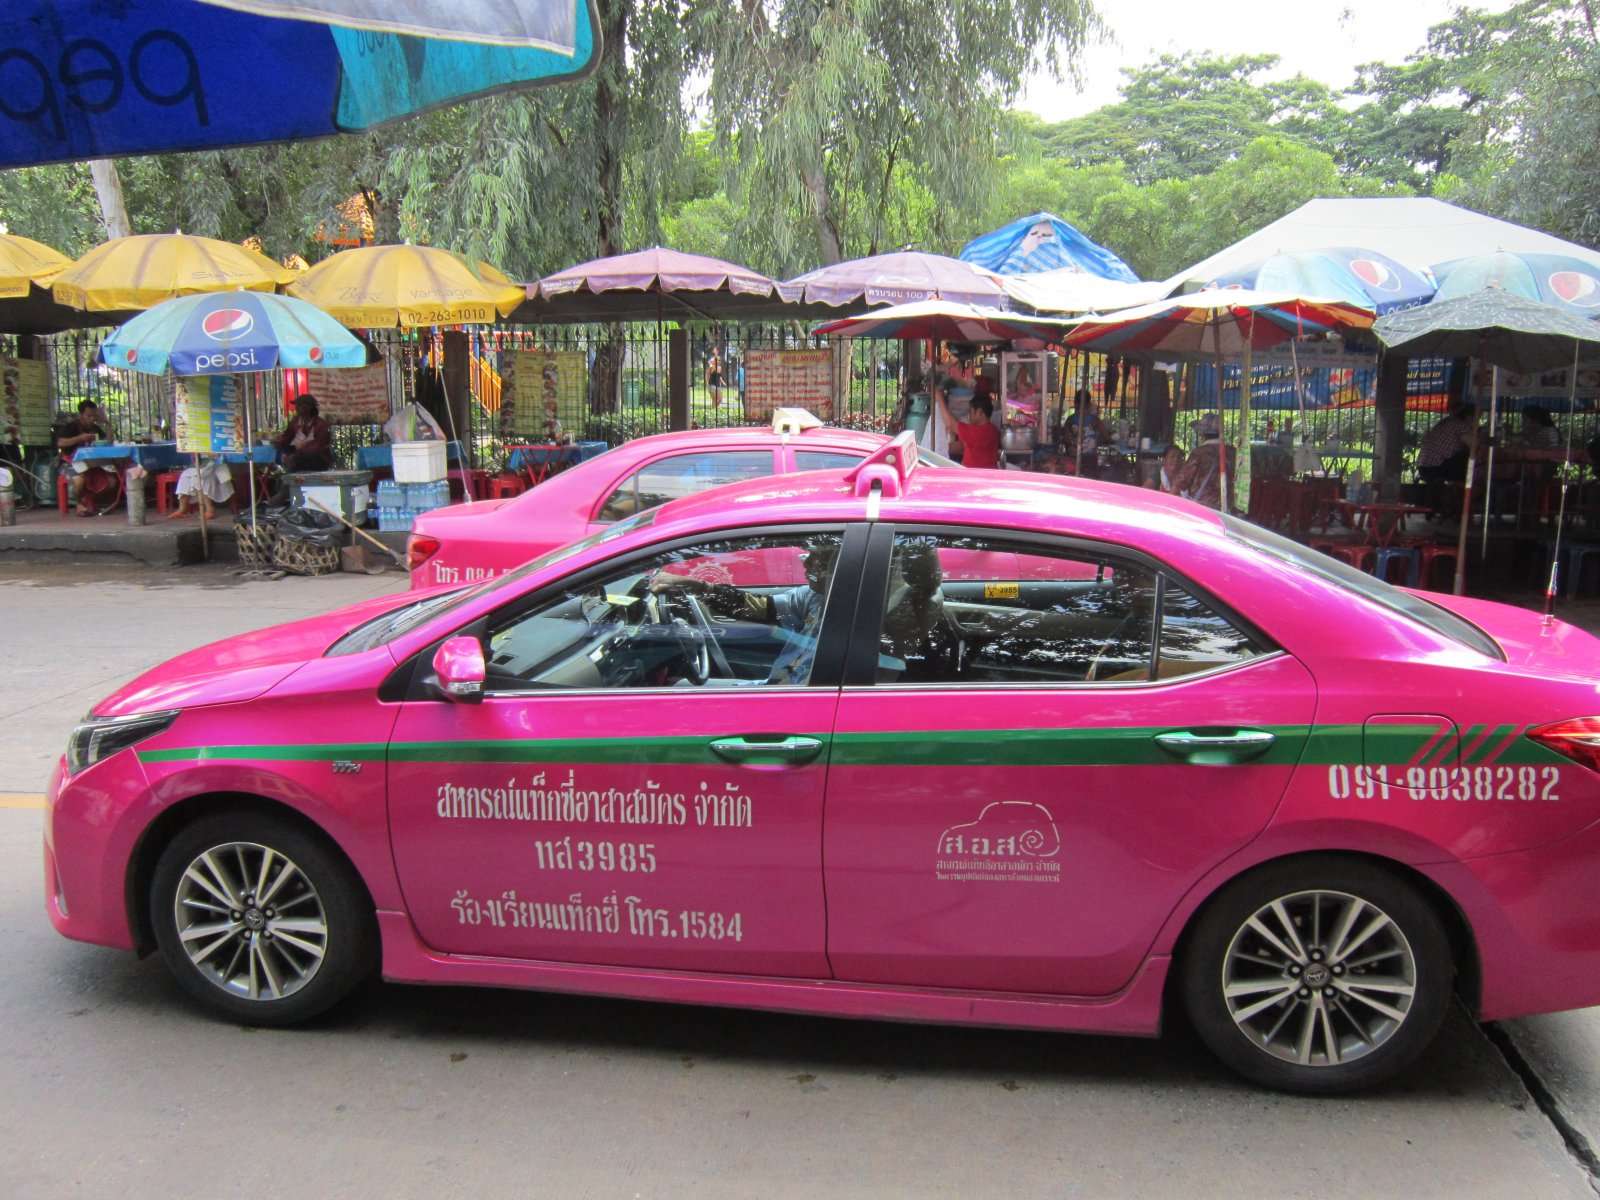 Getting to Chatuchak Market by taxi